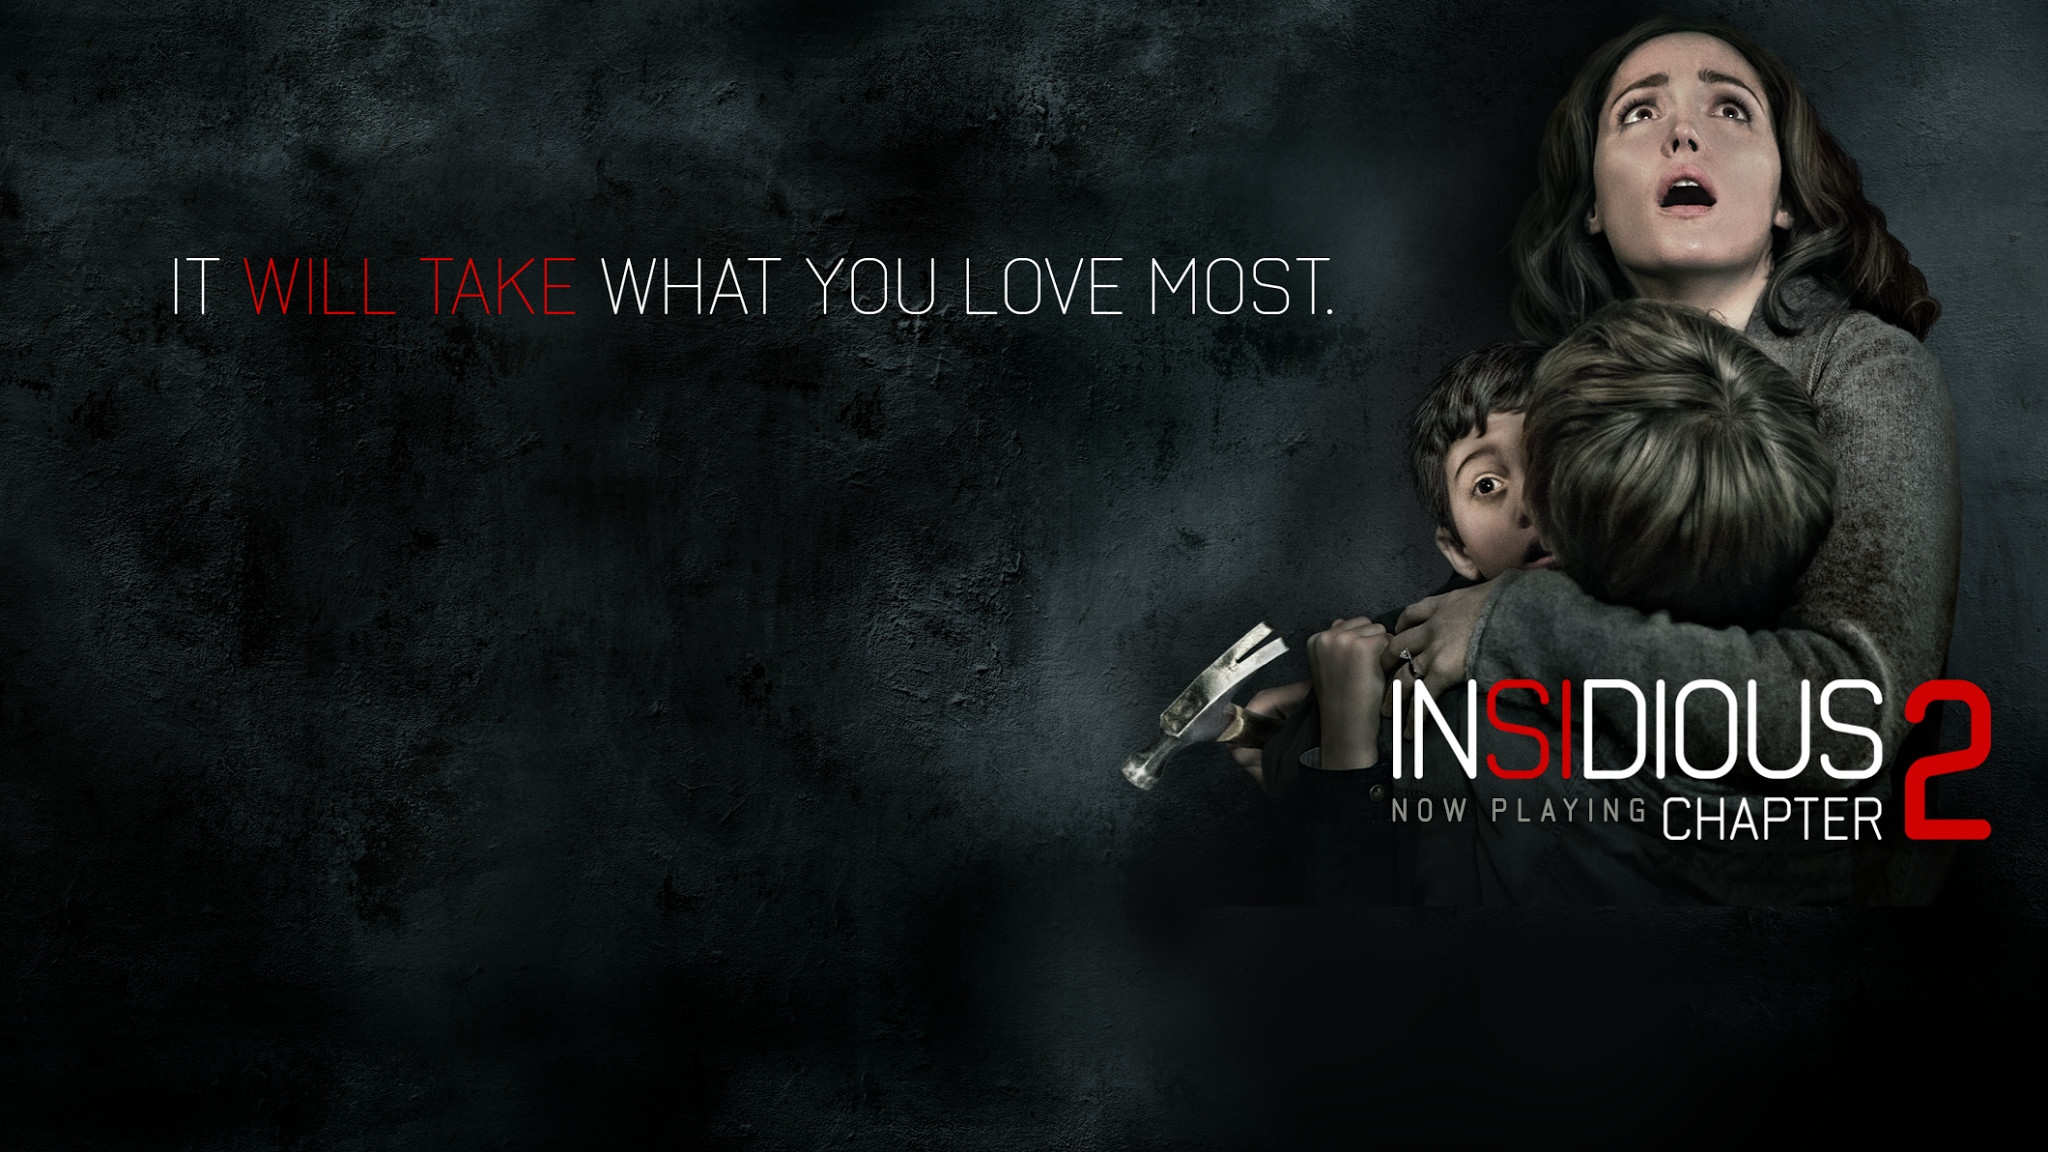 2048x1152 Download Insidious Horror Movie Poster HD Wallpaper. Search more high .